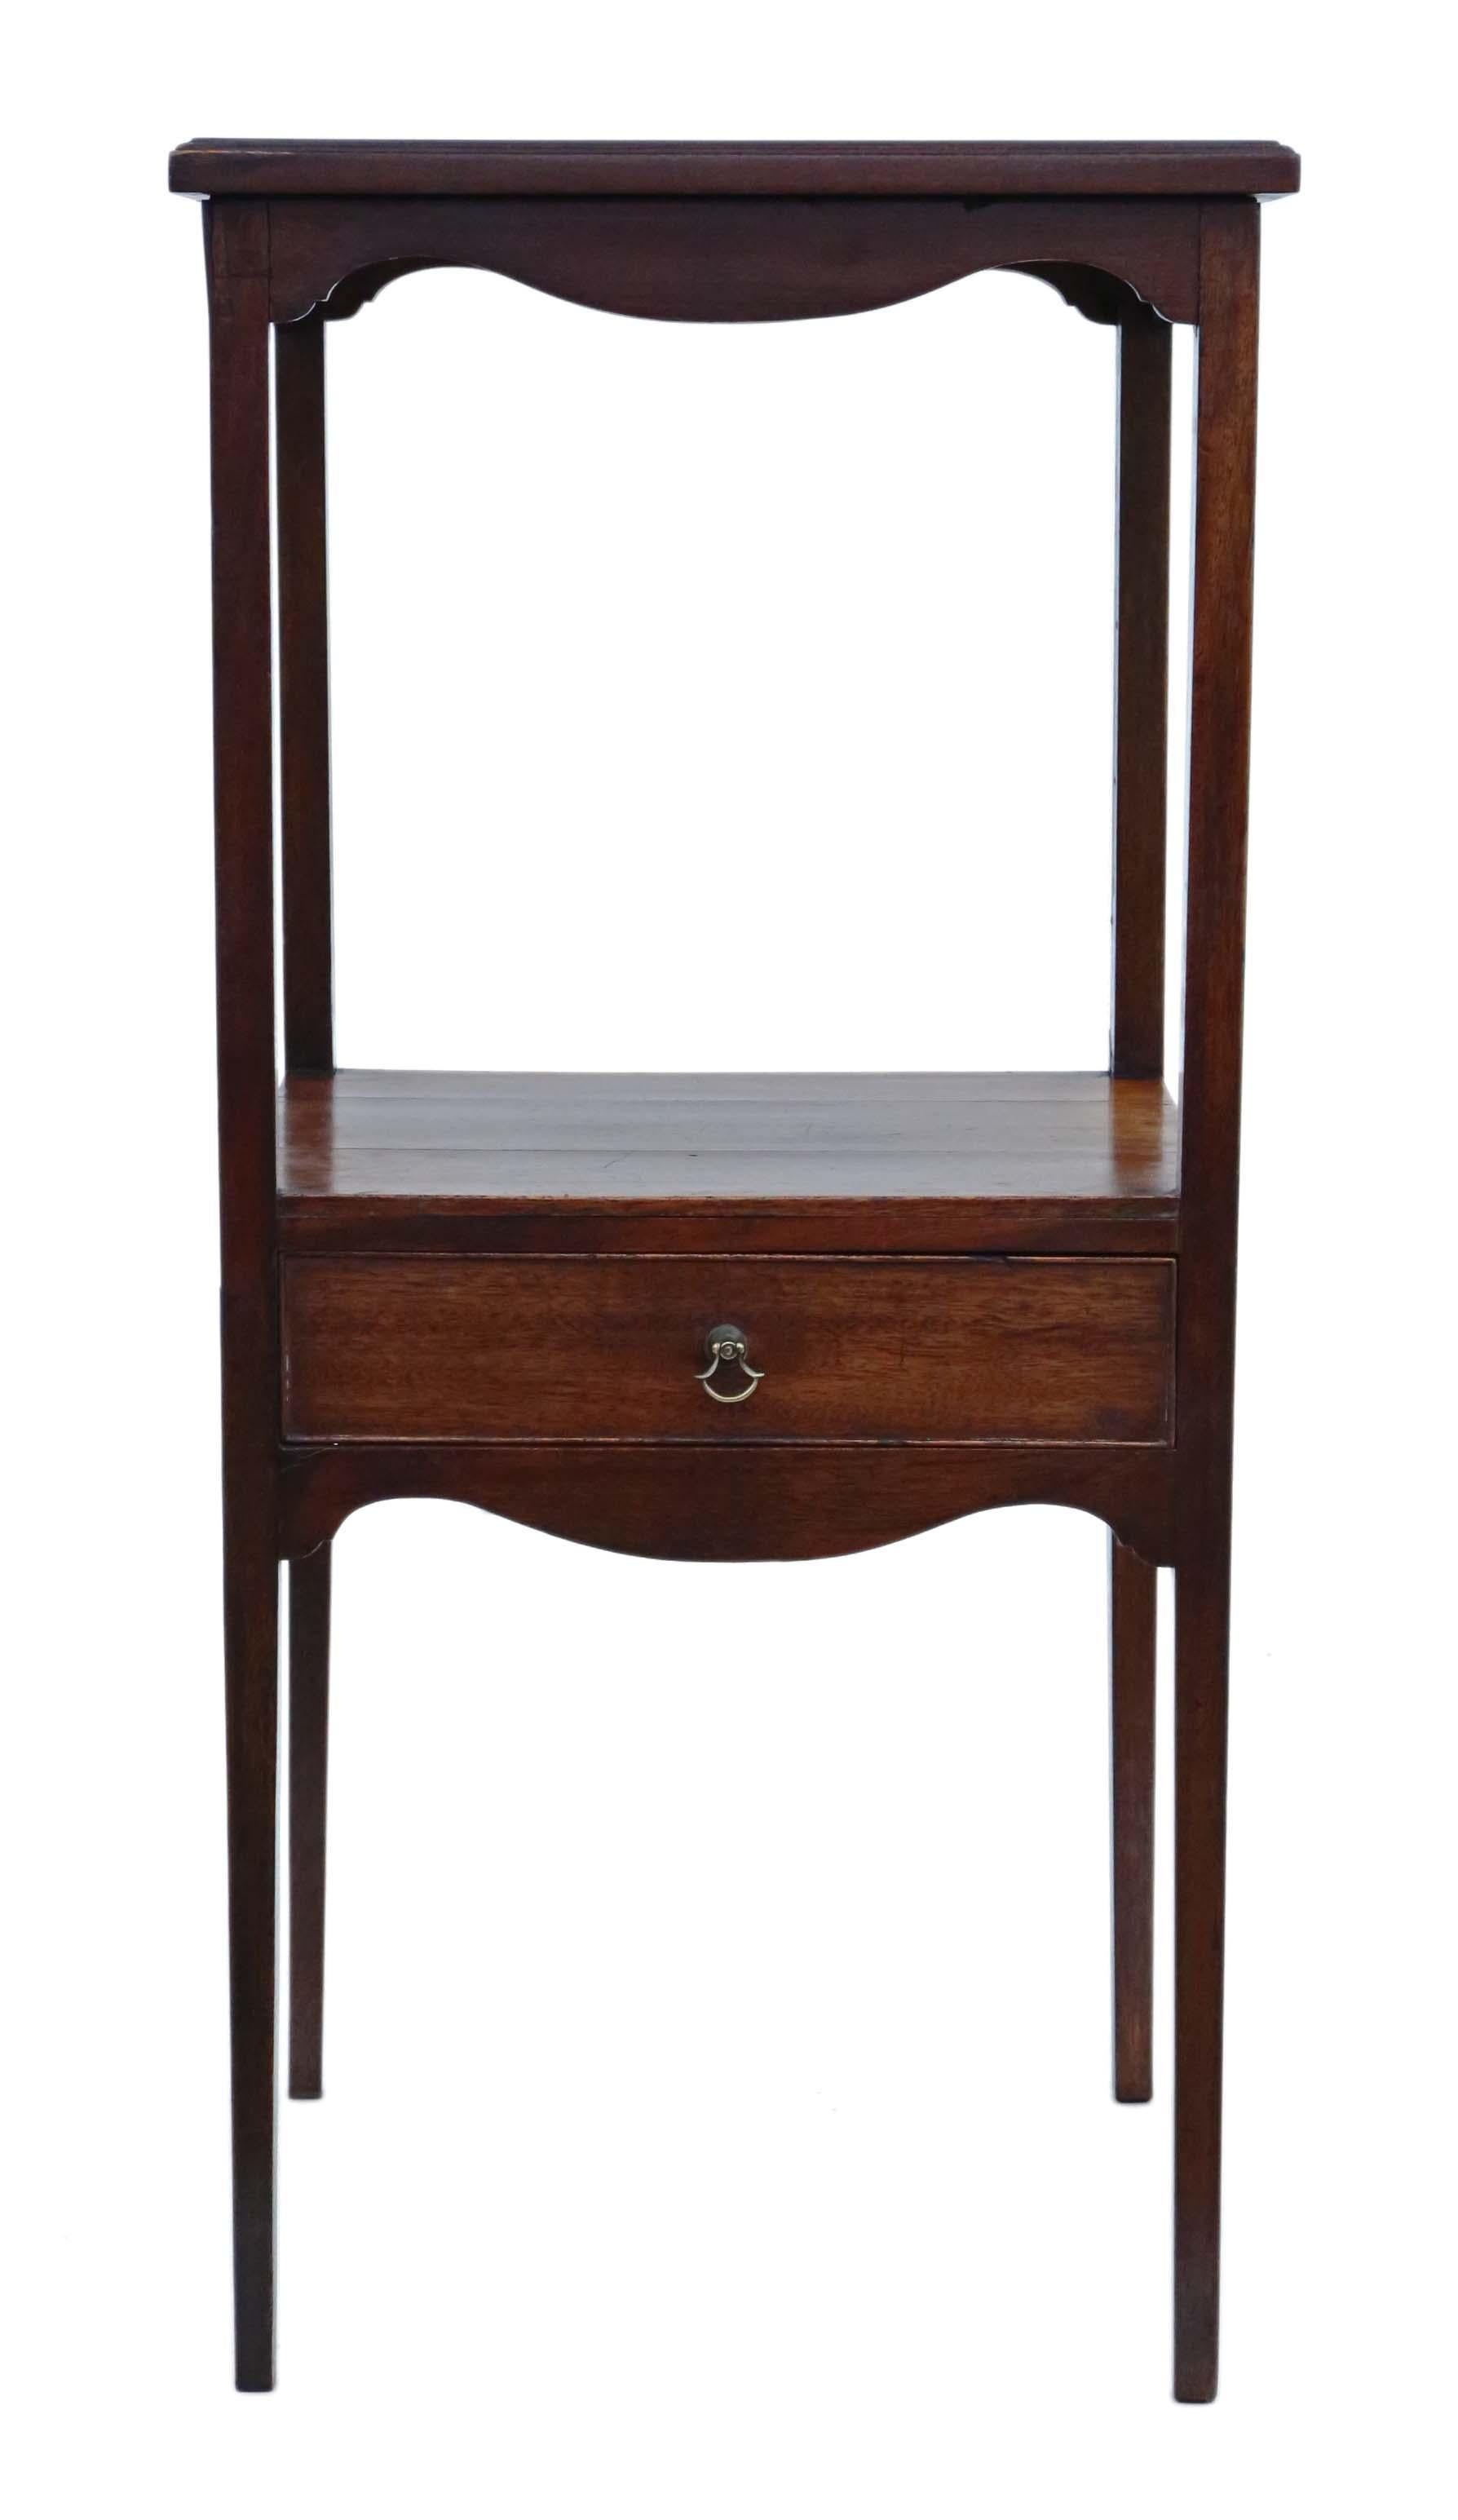 Antique quality Georgian C1805 mahogany bedside table washstand.

Great rare item, which is solid with no loose joints and no woodworm. The oak lined drawer slides freely. Full of age, character and charm.

Lovely age, colour and